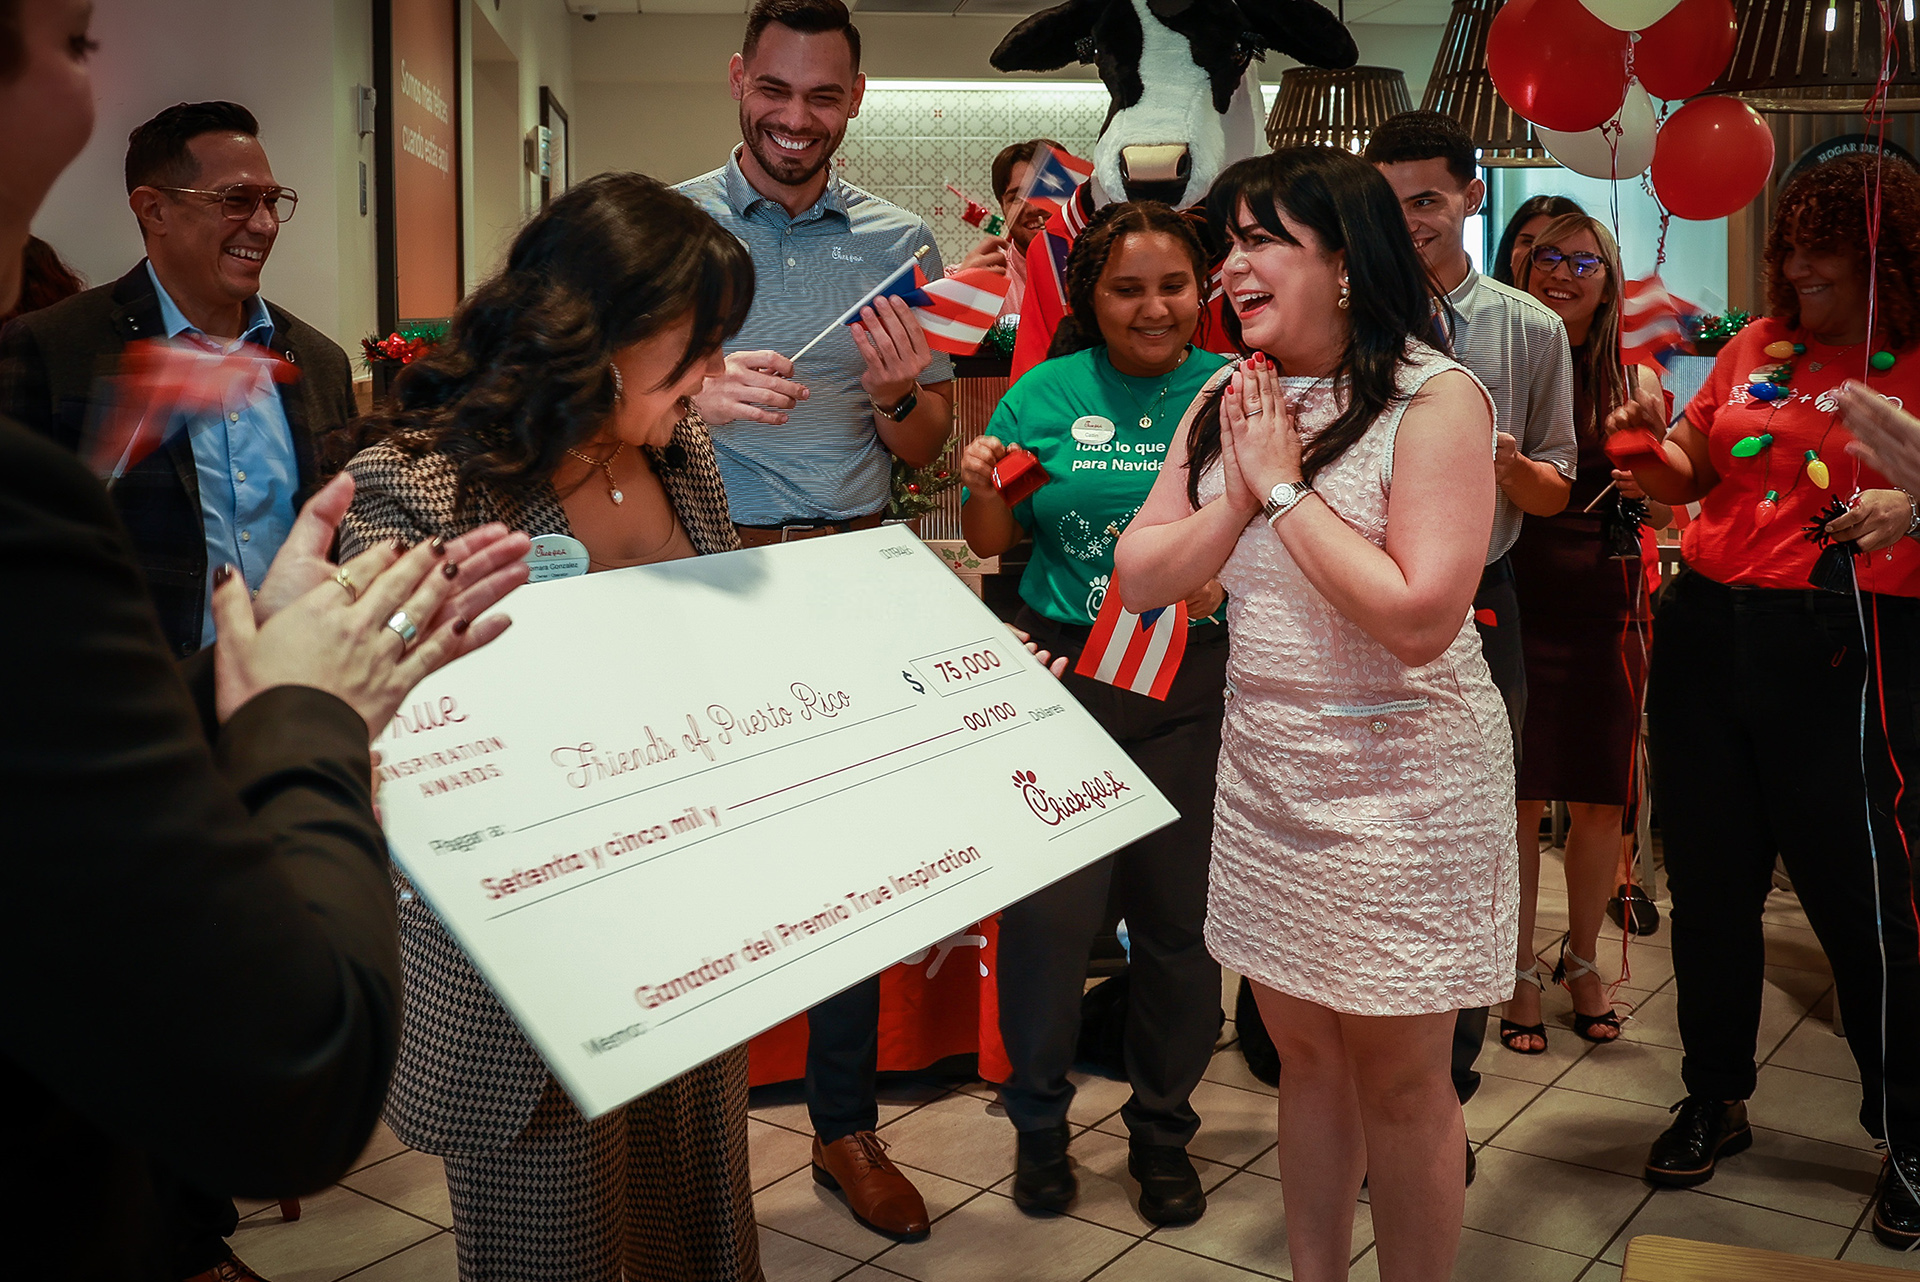 Friends of Puerto Rico, one of two first-time winners in Puerto Rico, received a $75,000 Chick-fil-A True Inspiration Awards grant to further their efforts of providing underserved youth with entrepreneurial learning opportunities across the island.